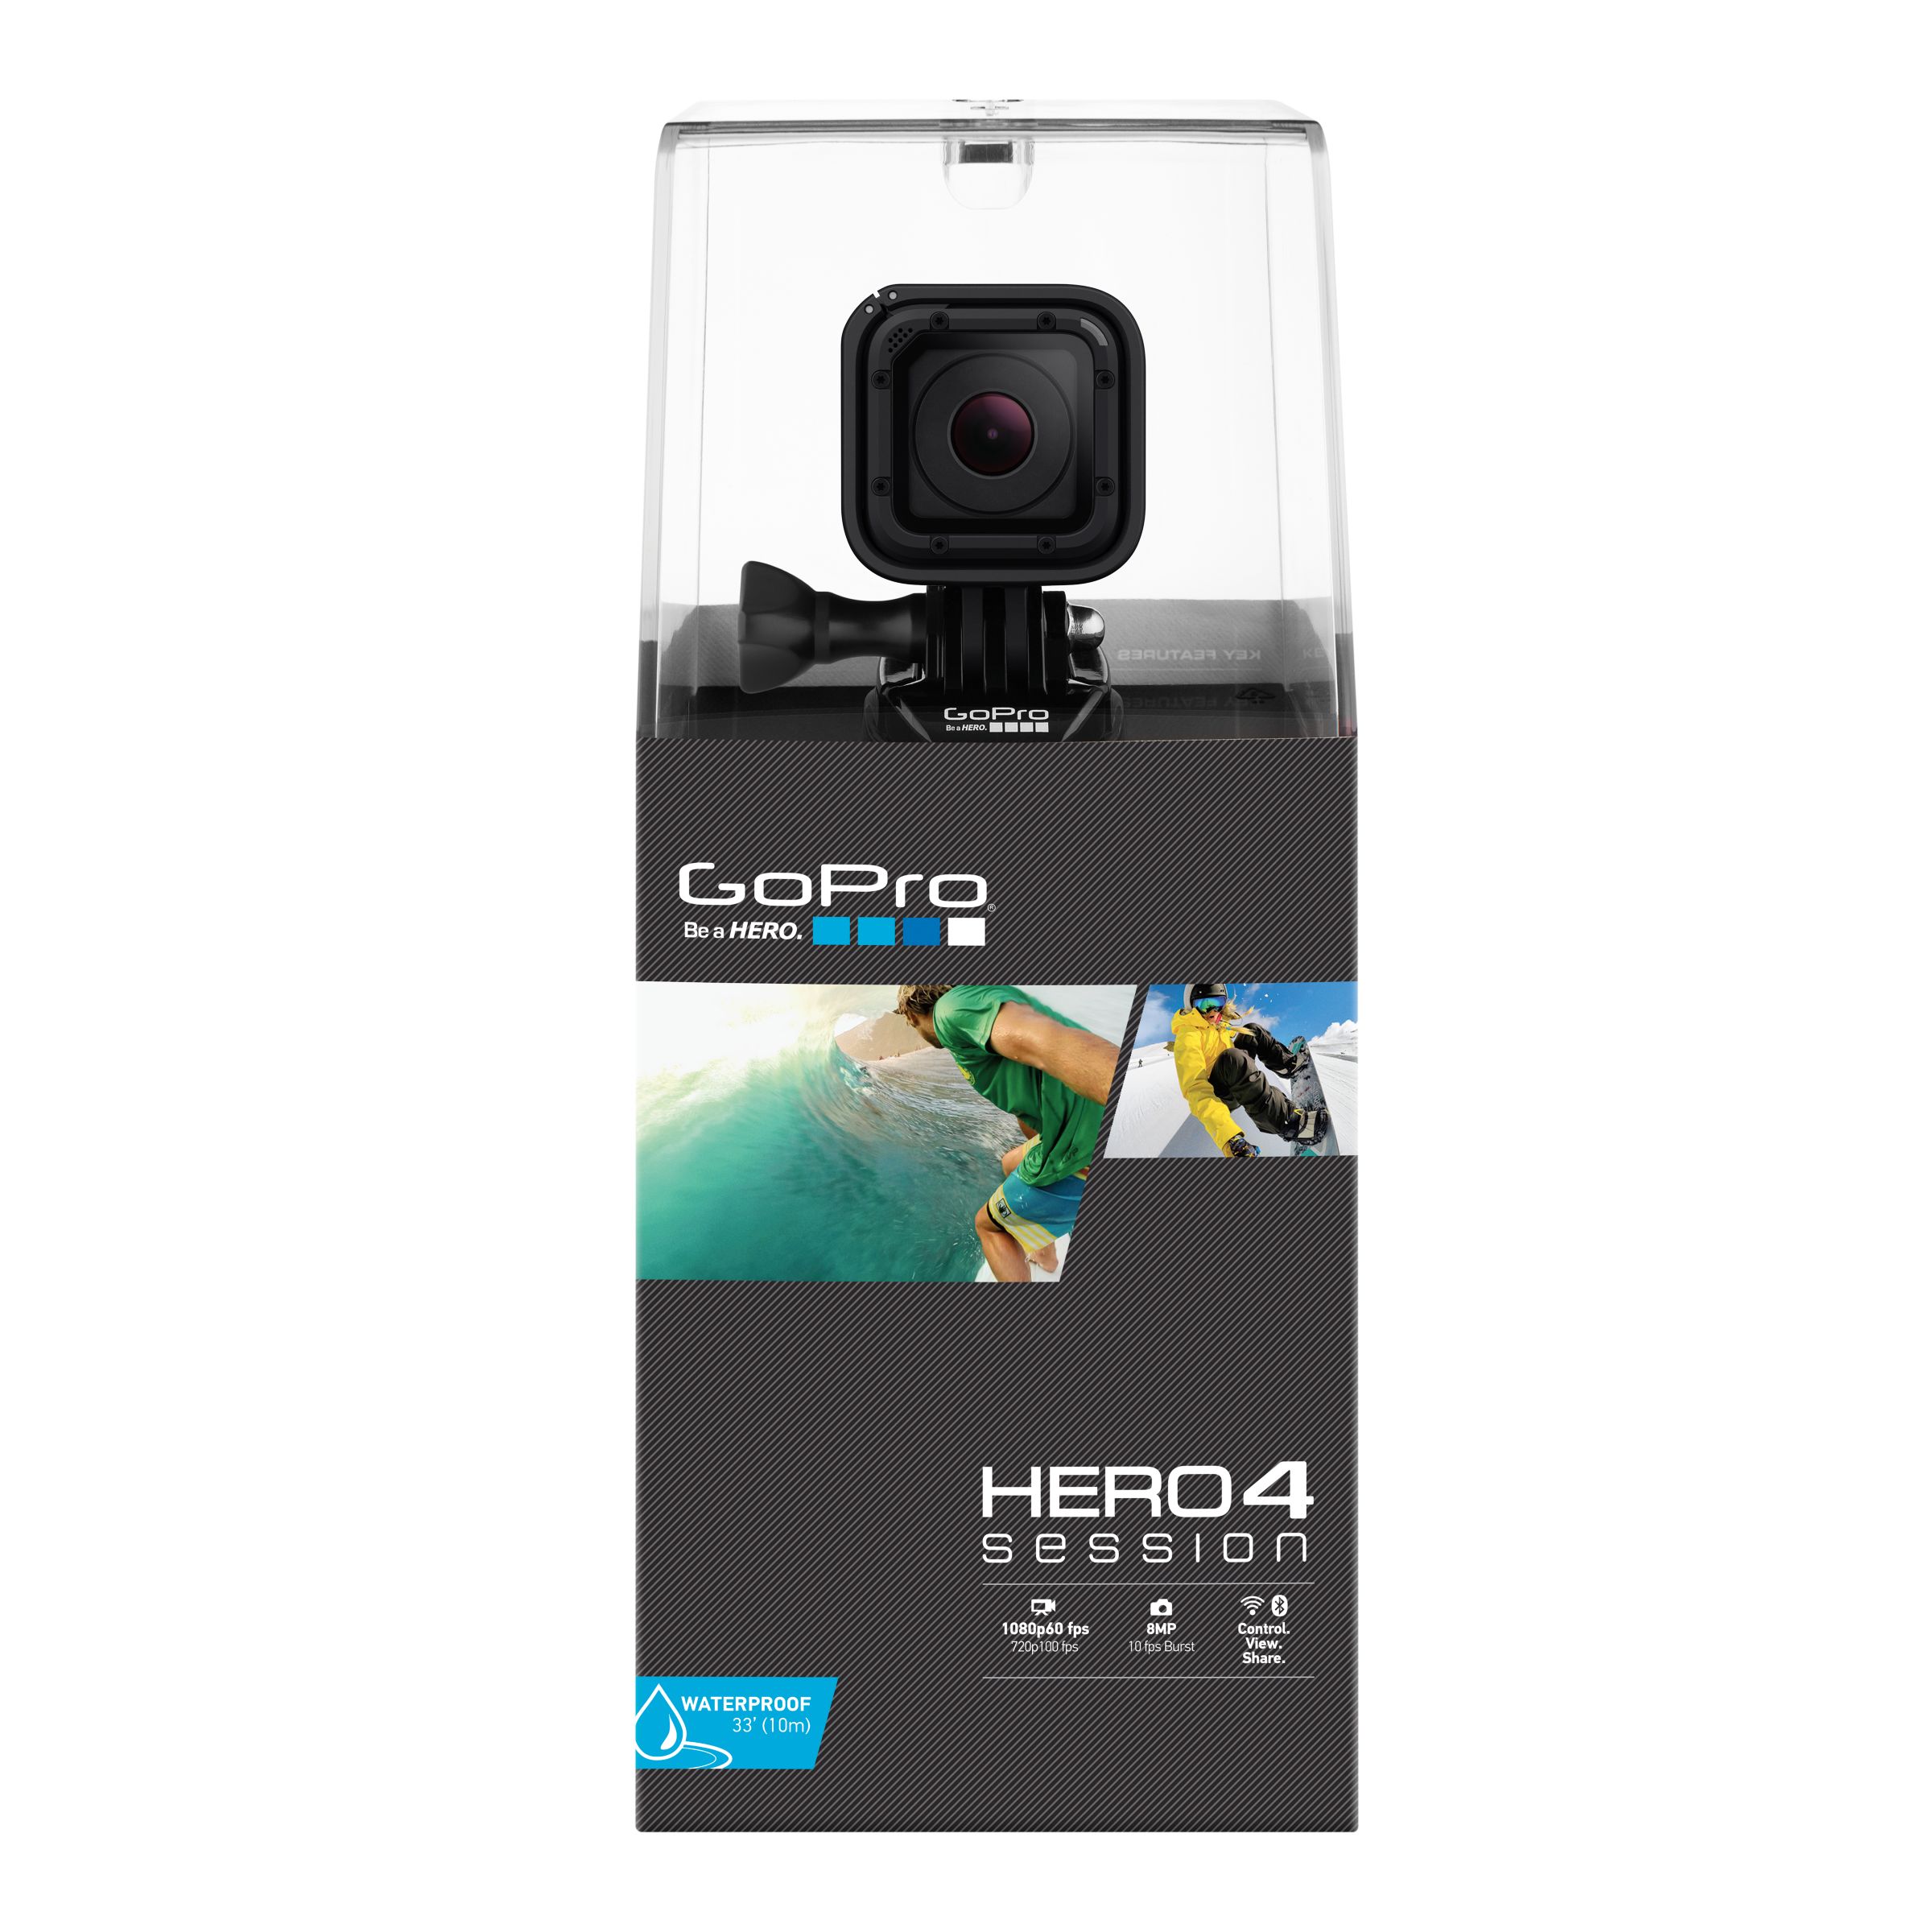 Gopro Hero4 Session Waterproof Camcorder Hd 1080p 8mp Wi Fi Bluetooth At John Lewis Partners